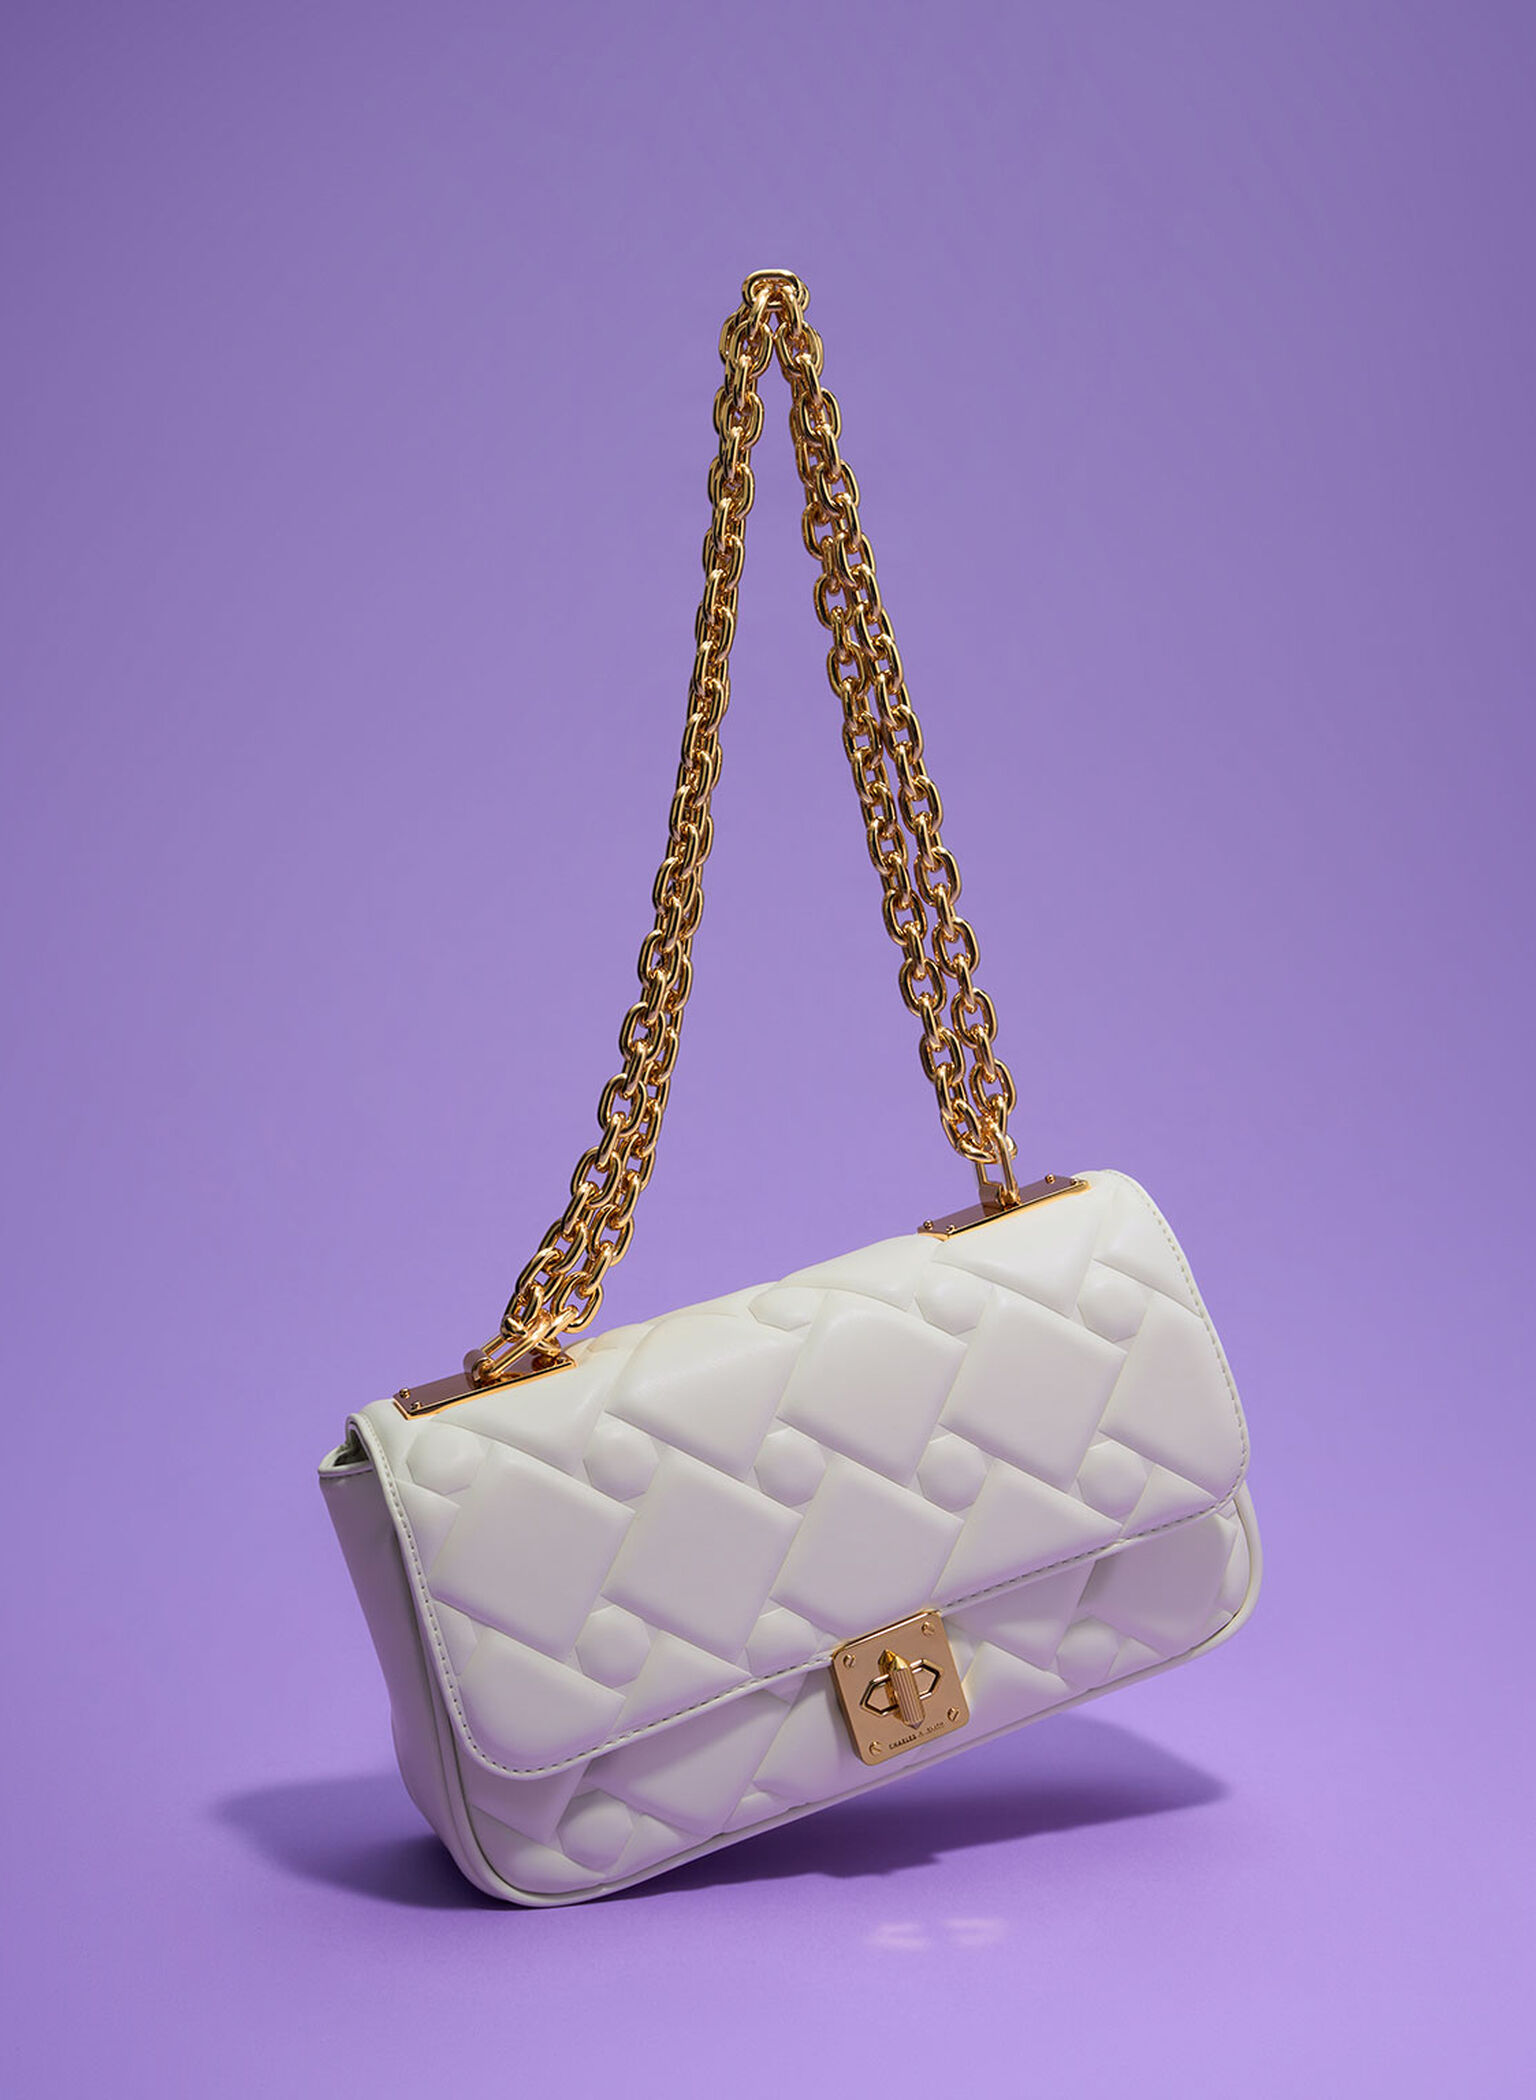 Charles & Keith - Women's Tillie Quilted Chain Bag, Cream, M